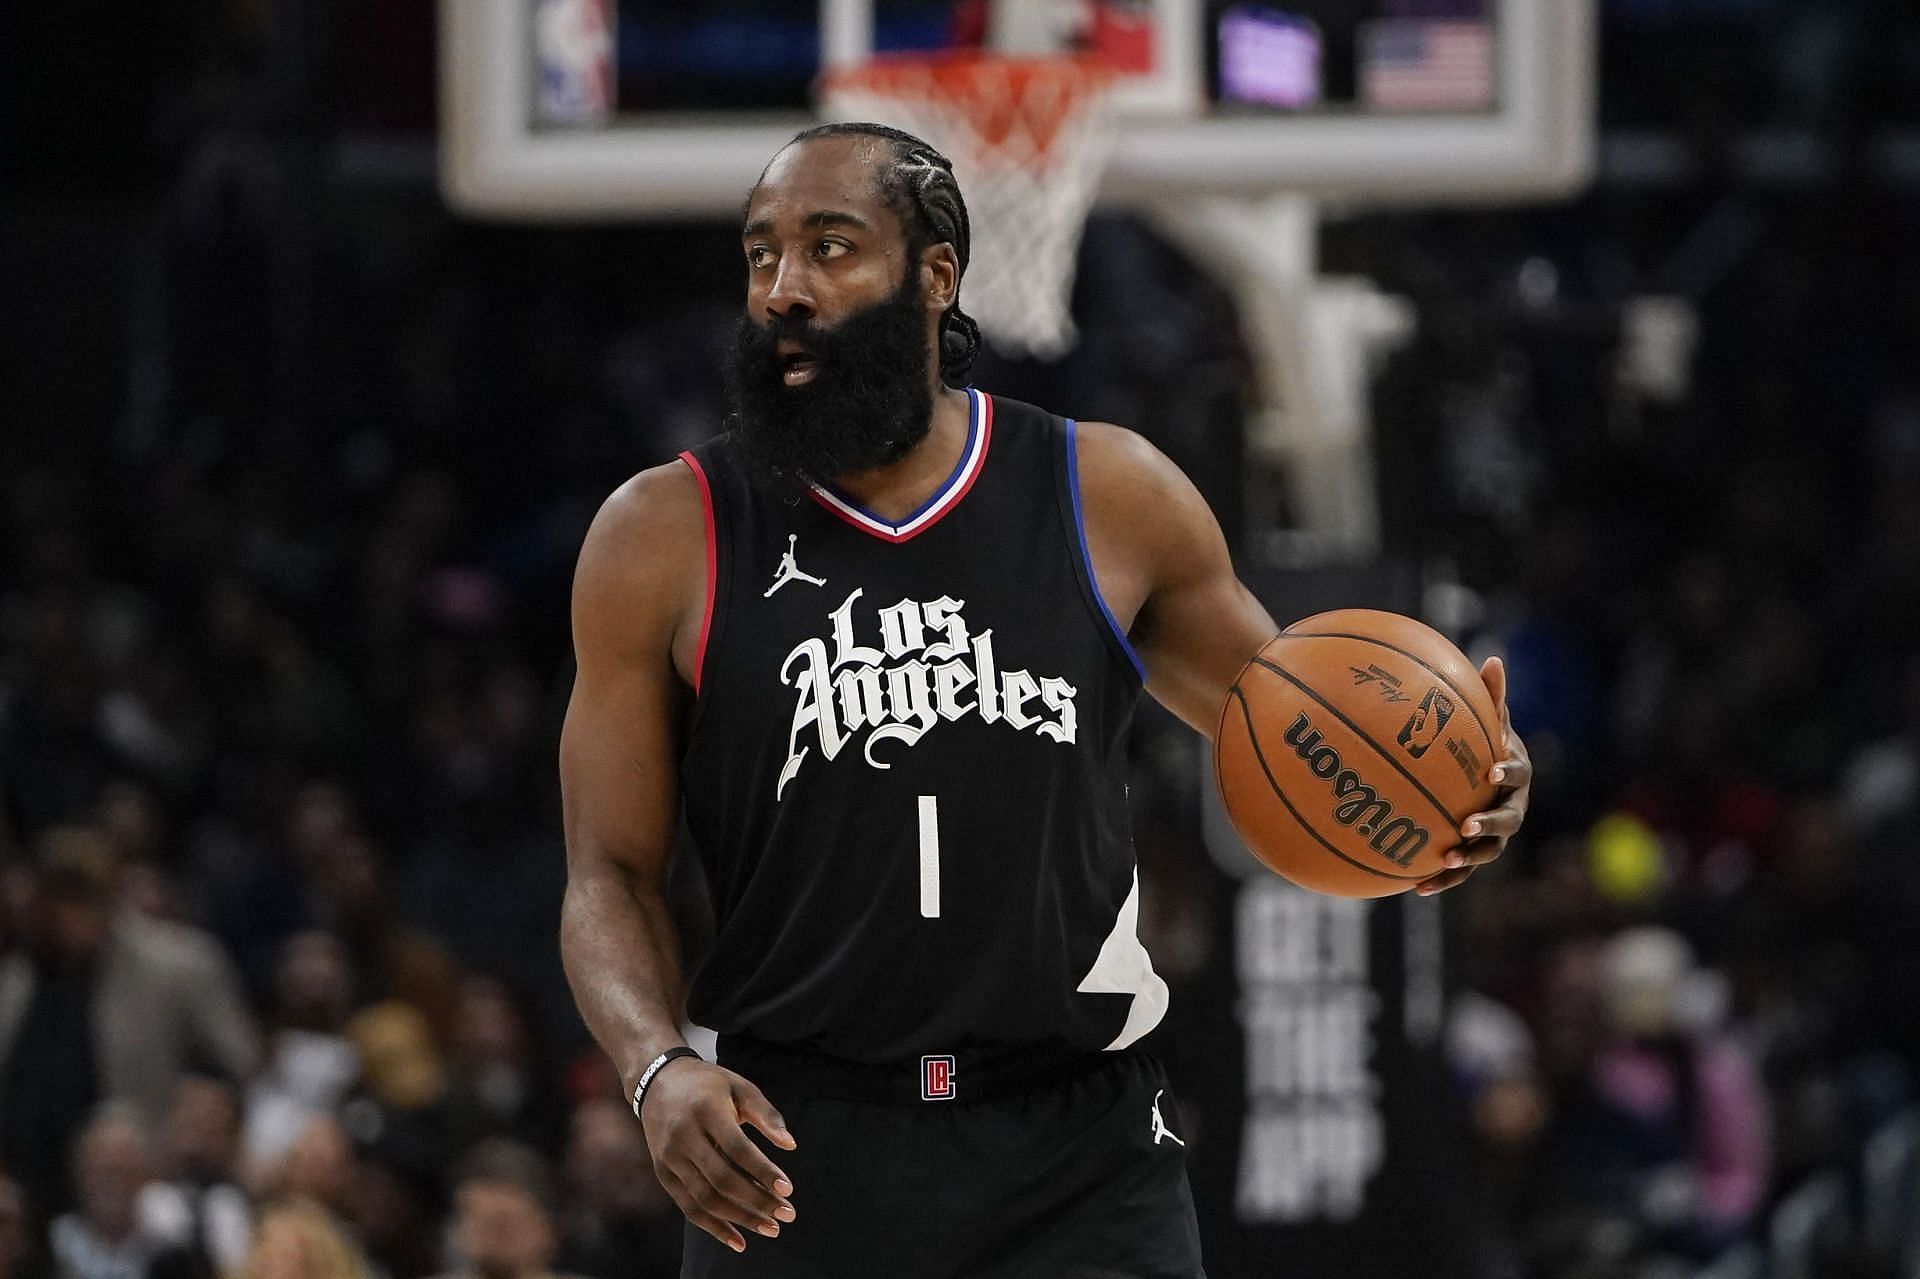 Fans seem to agree with Nuggets&rsquo; star wanting James Harden to shoot more